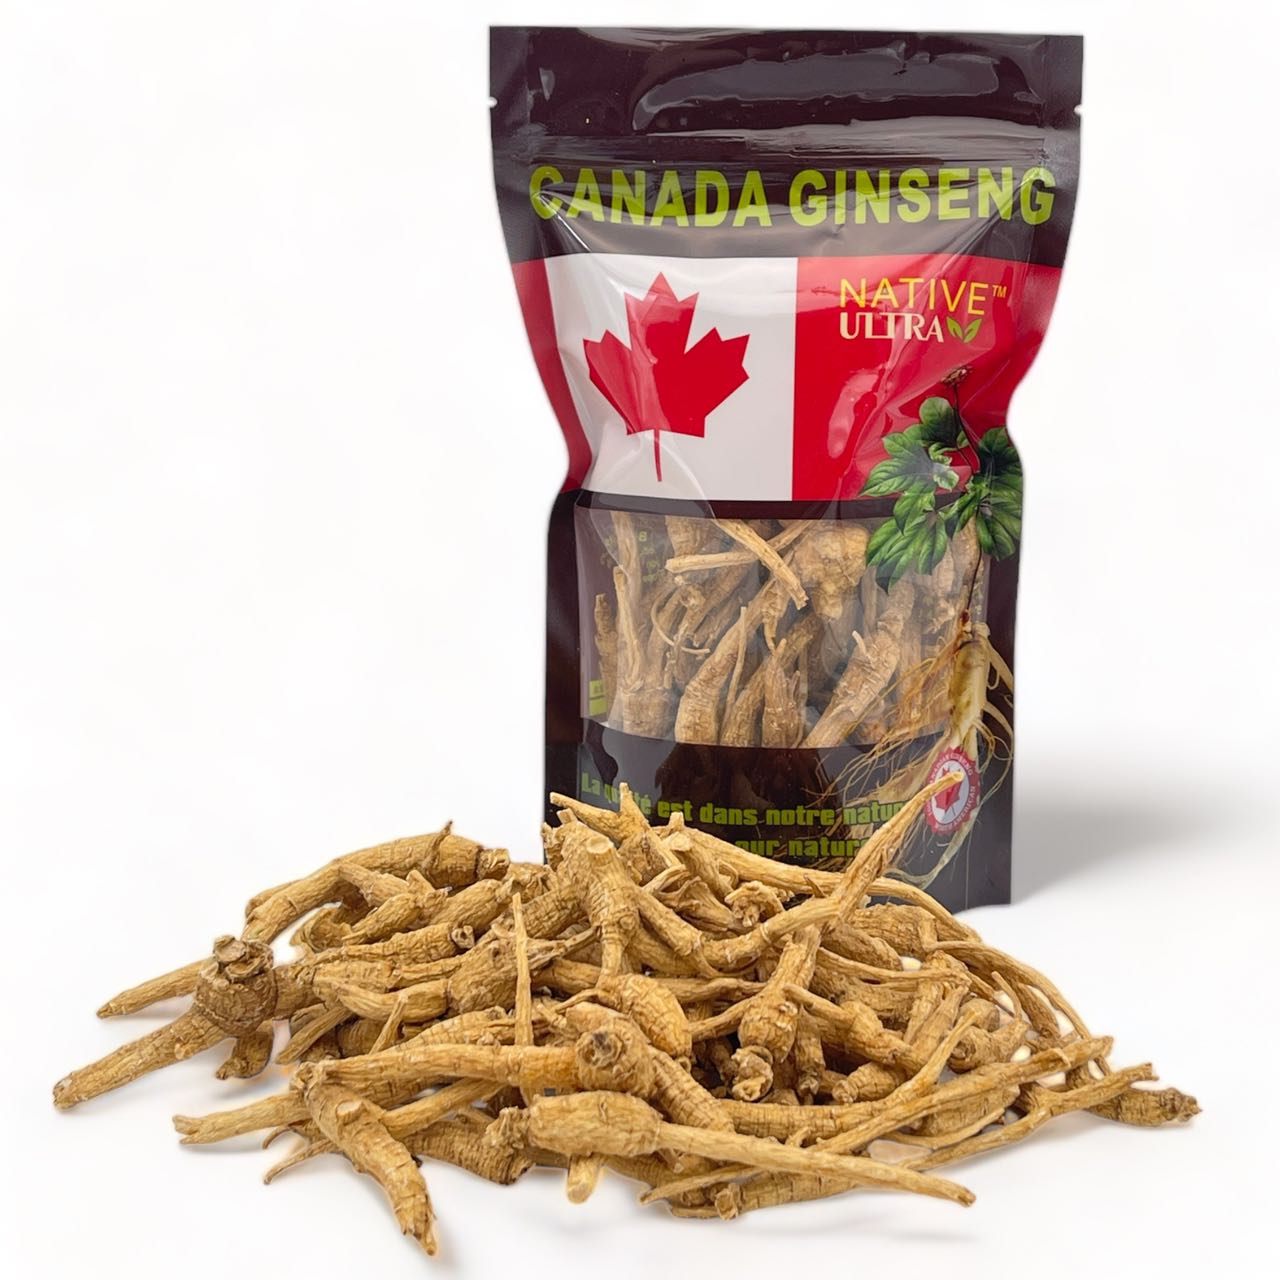 "NATIVE ULTRA" Quality 4-Year  Canadian Ginseng Small Whole Roots,  227g/bag